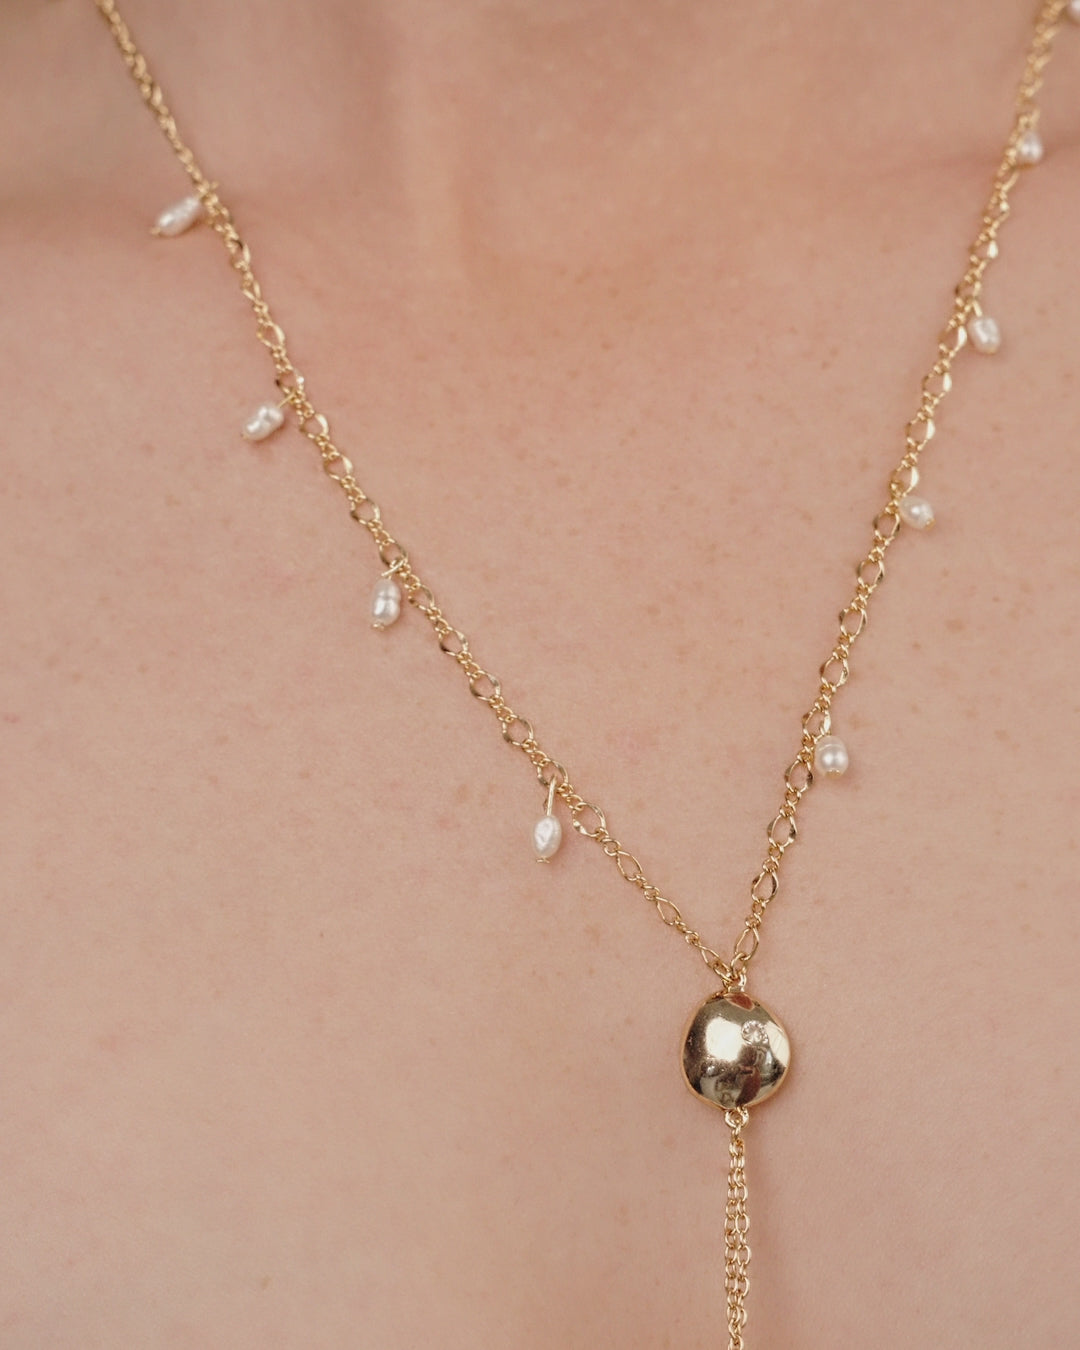 Pebble and Freshwater Pearl Lariat Necklace on model in video